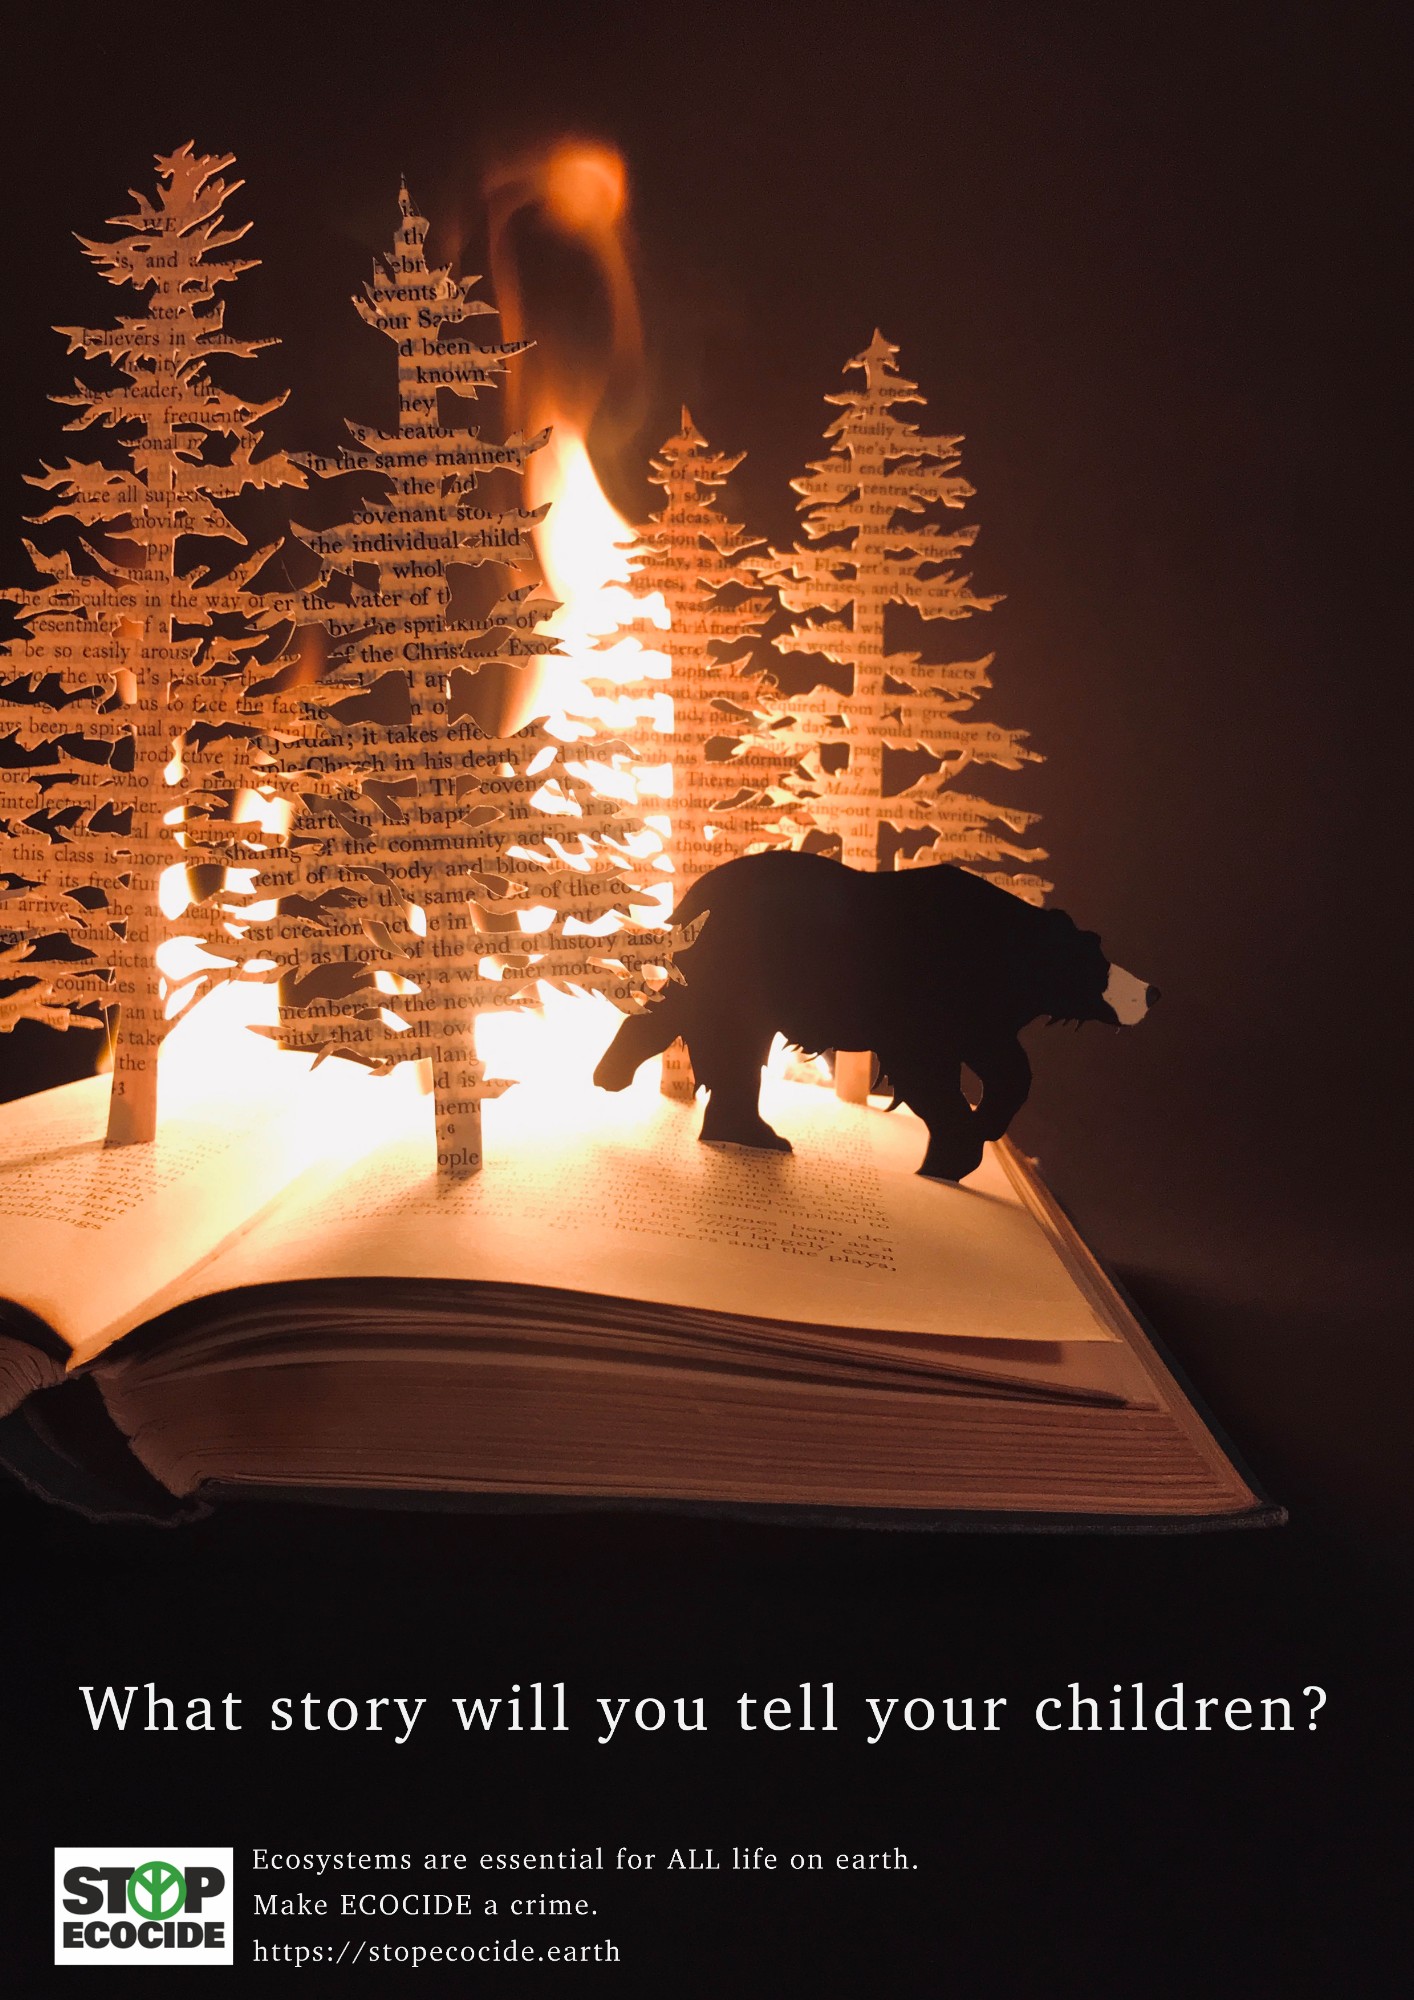 Speculative poster campaign based on promoting a new law to protect ecosystems for the next generation. Created from an adapted book which I distorted with fire to highlight the issue of wildfires at the Arctic Circle.